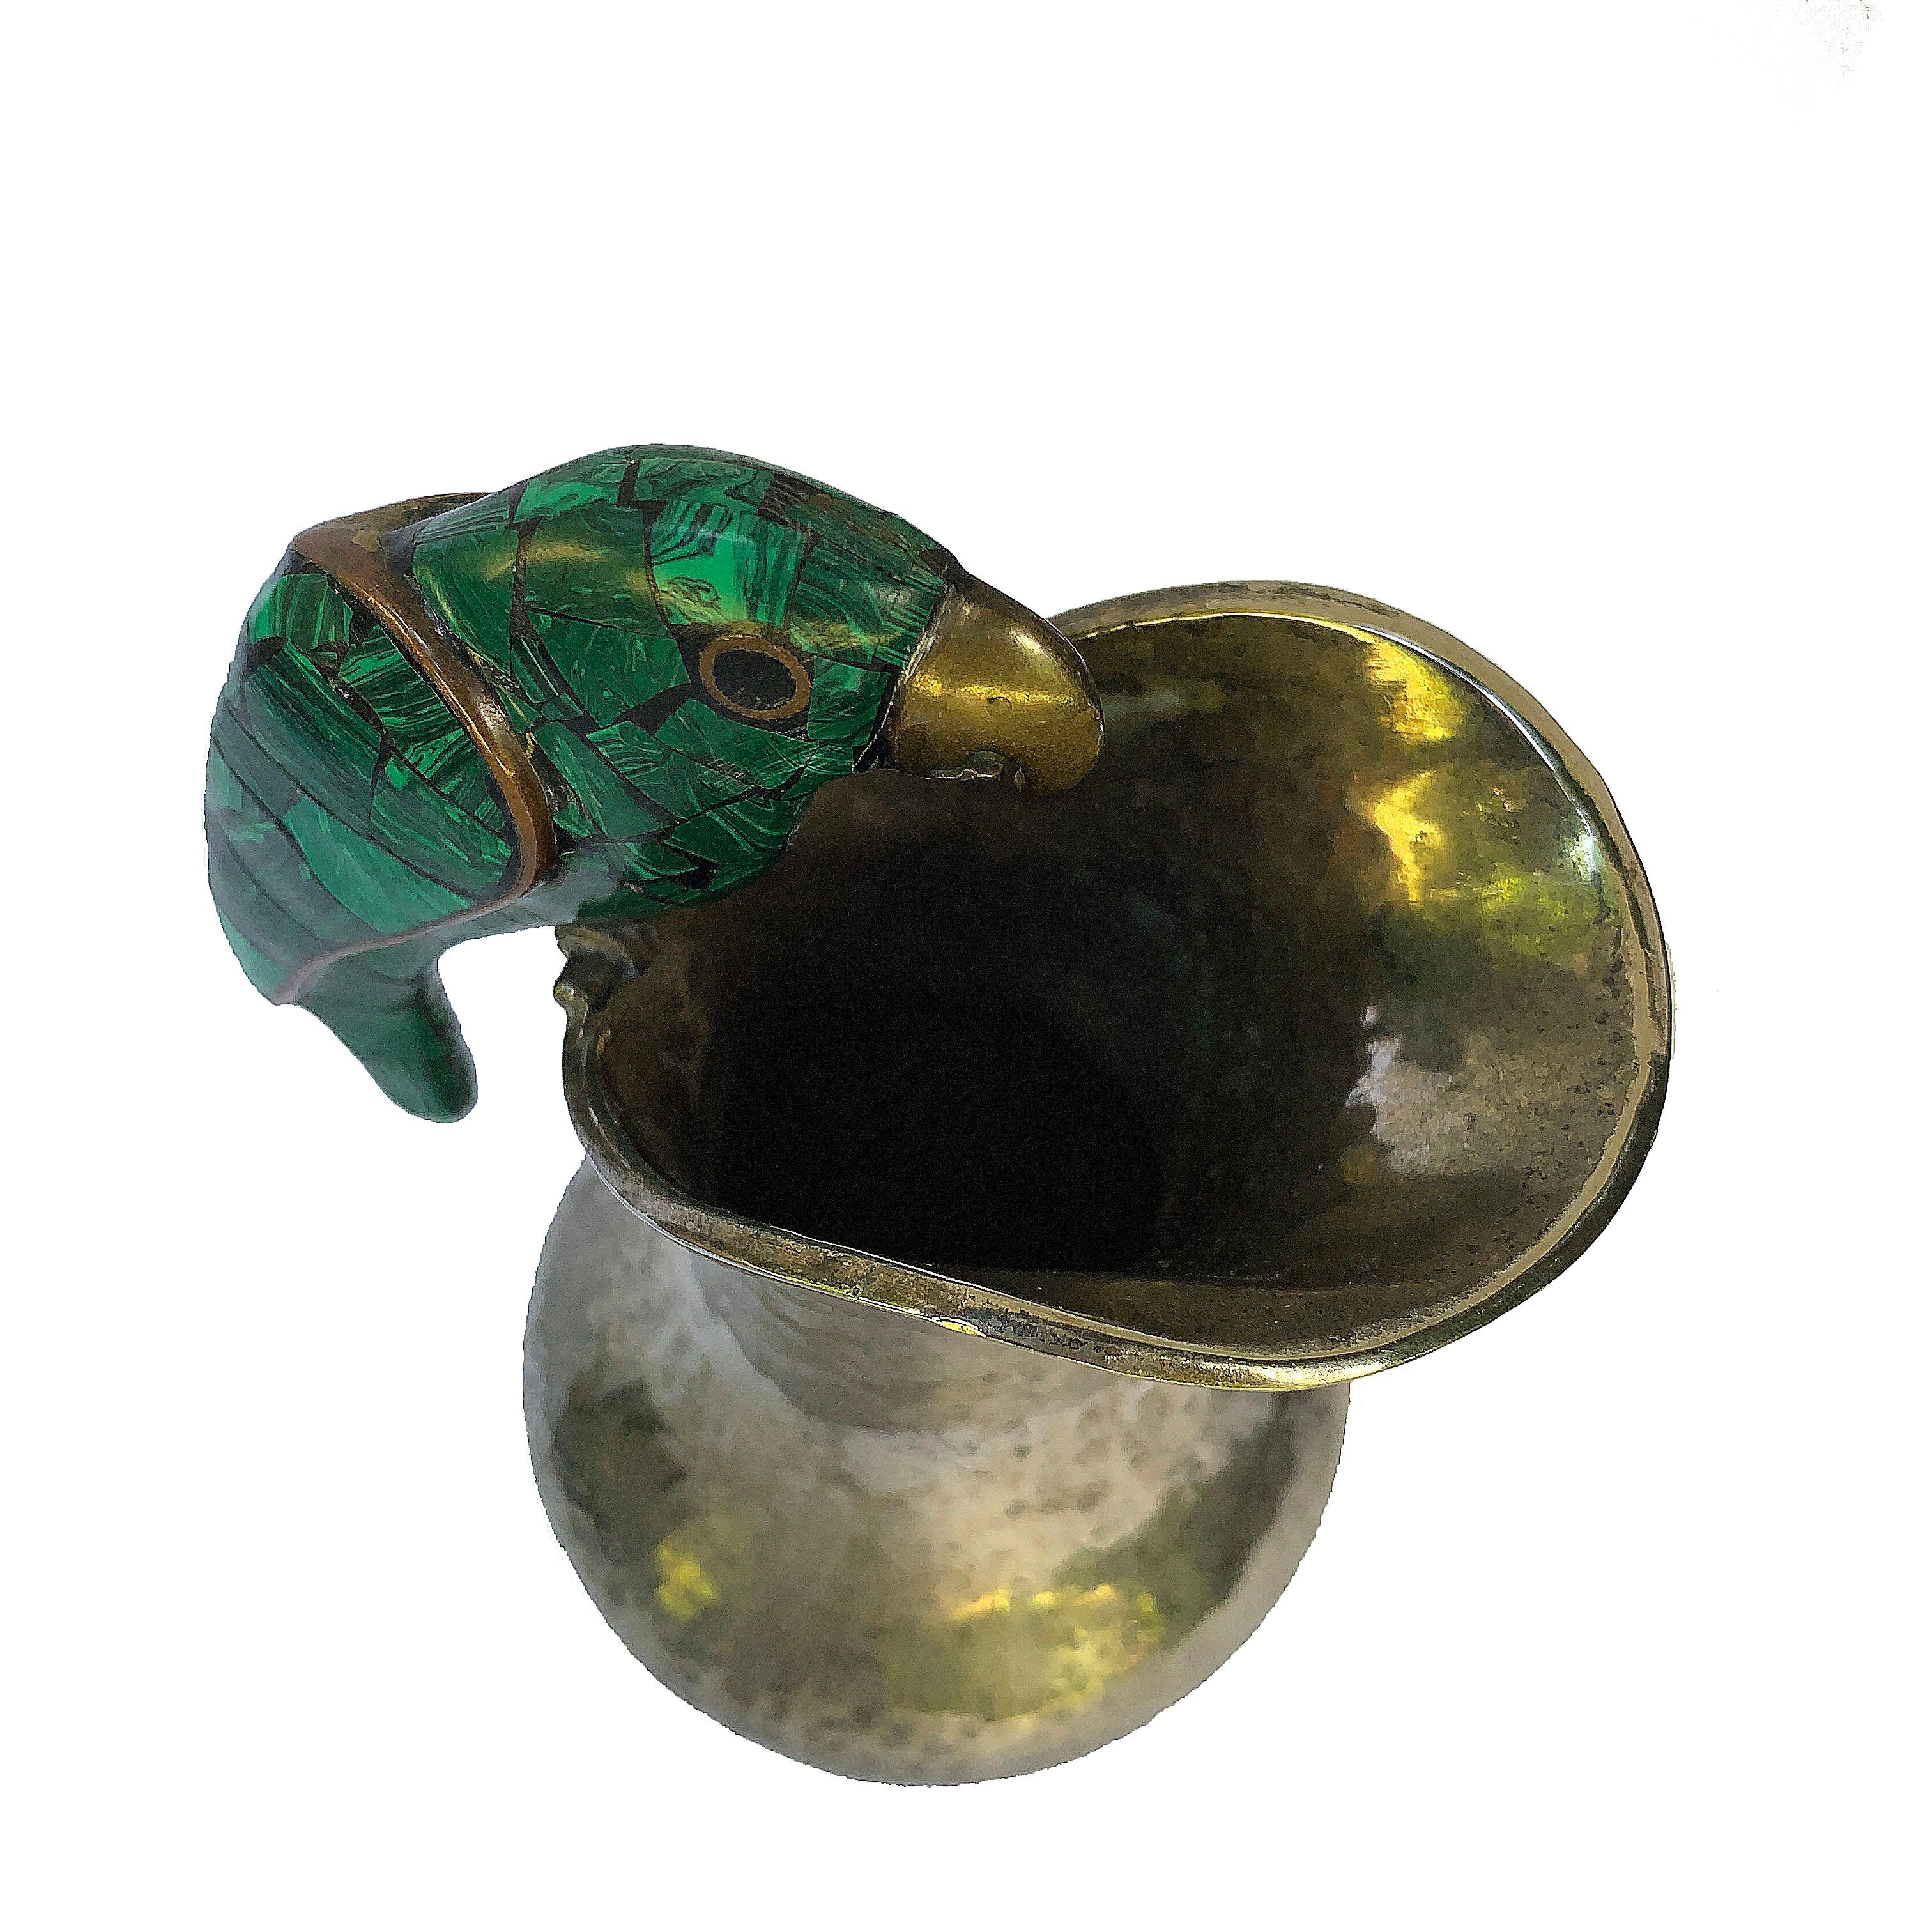 This petite vase by Fajardo Taxco Mexico silver plated vase and malachite brass parrot, is eye catching. The parrot is perched on the rim and its placement balances the shape of the rim perfectly. The parrot is adorned with a malachite mosaic, with